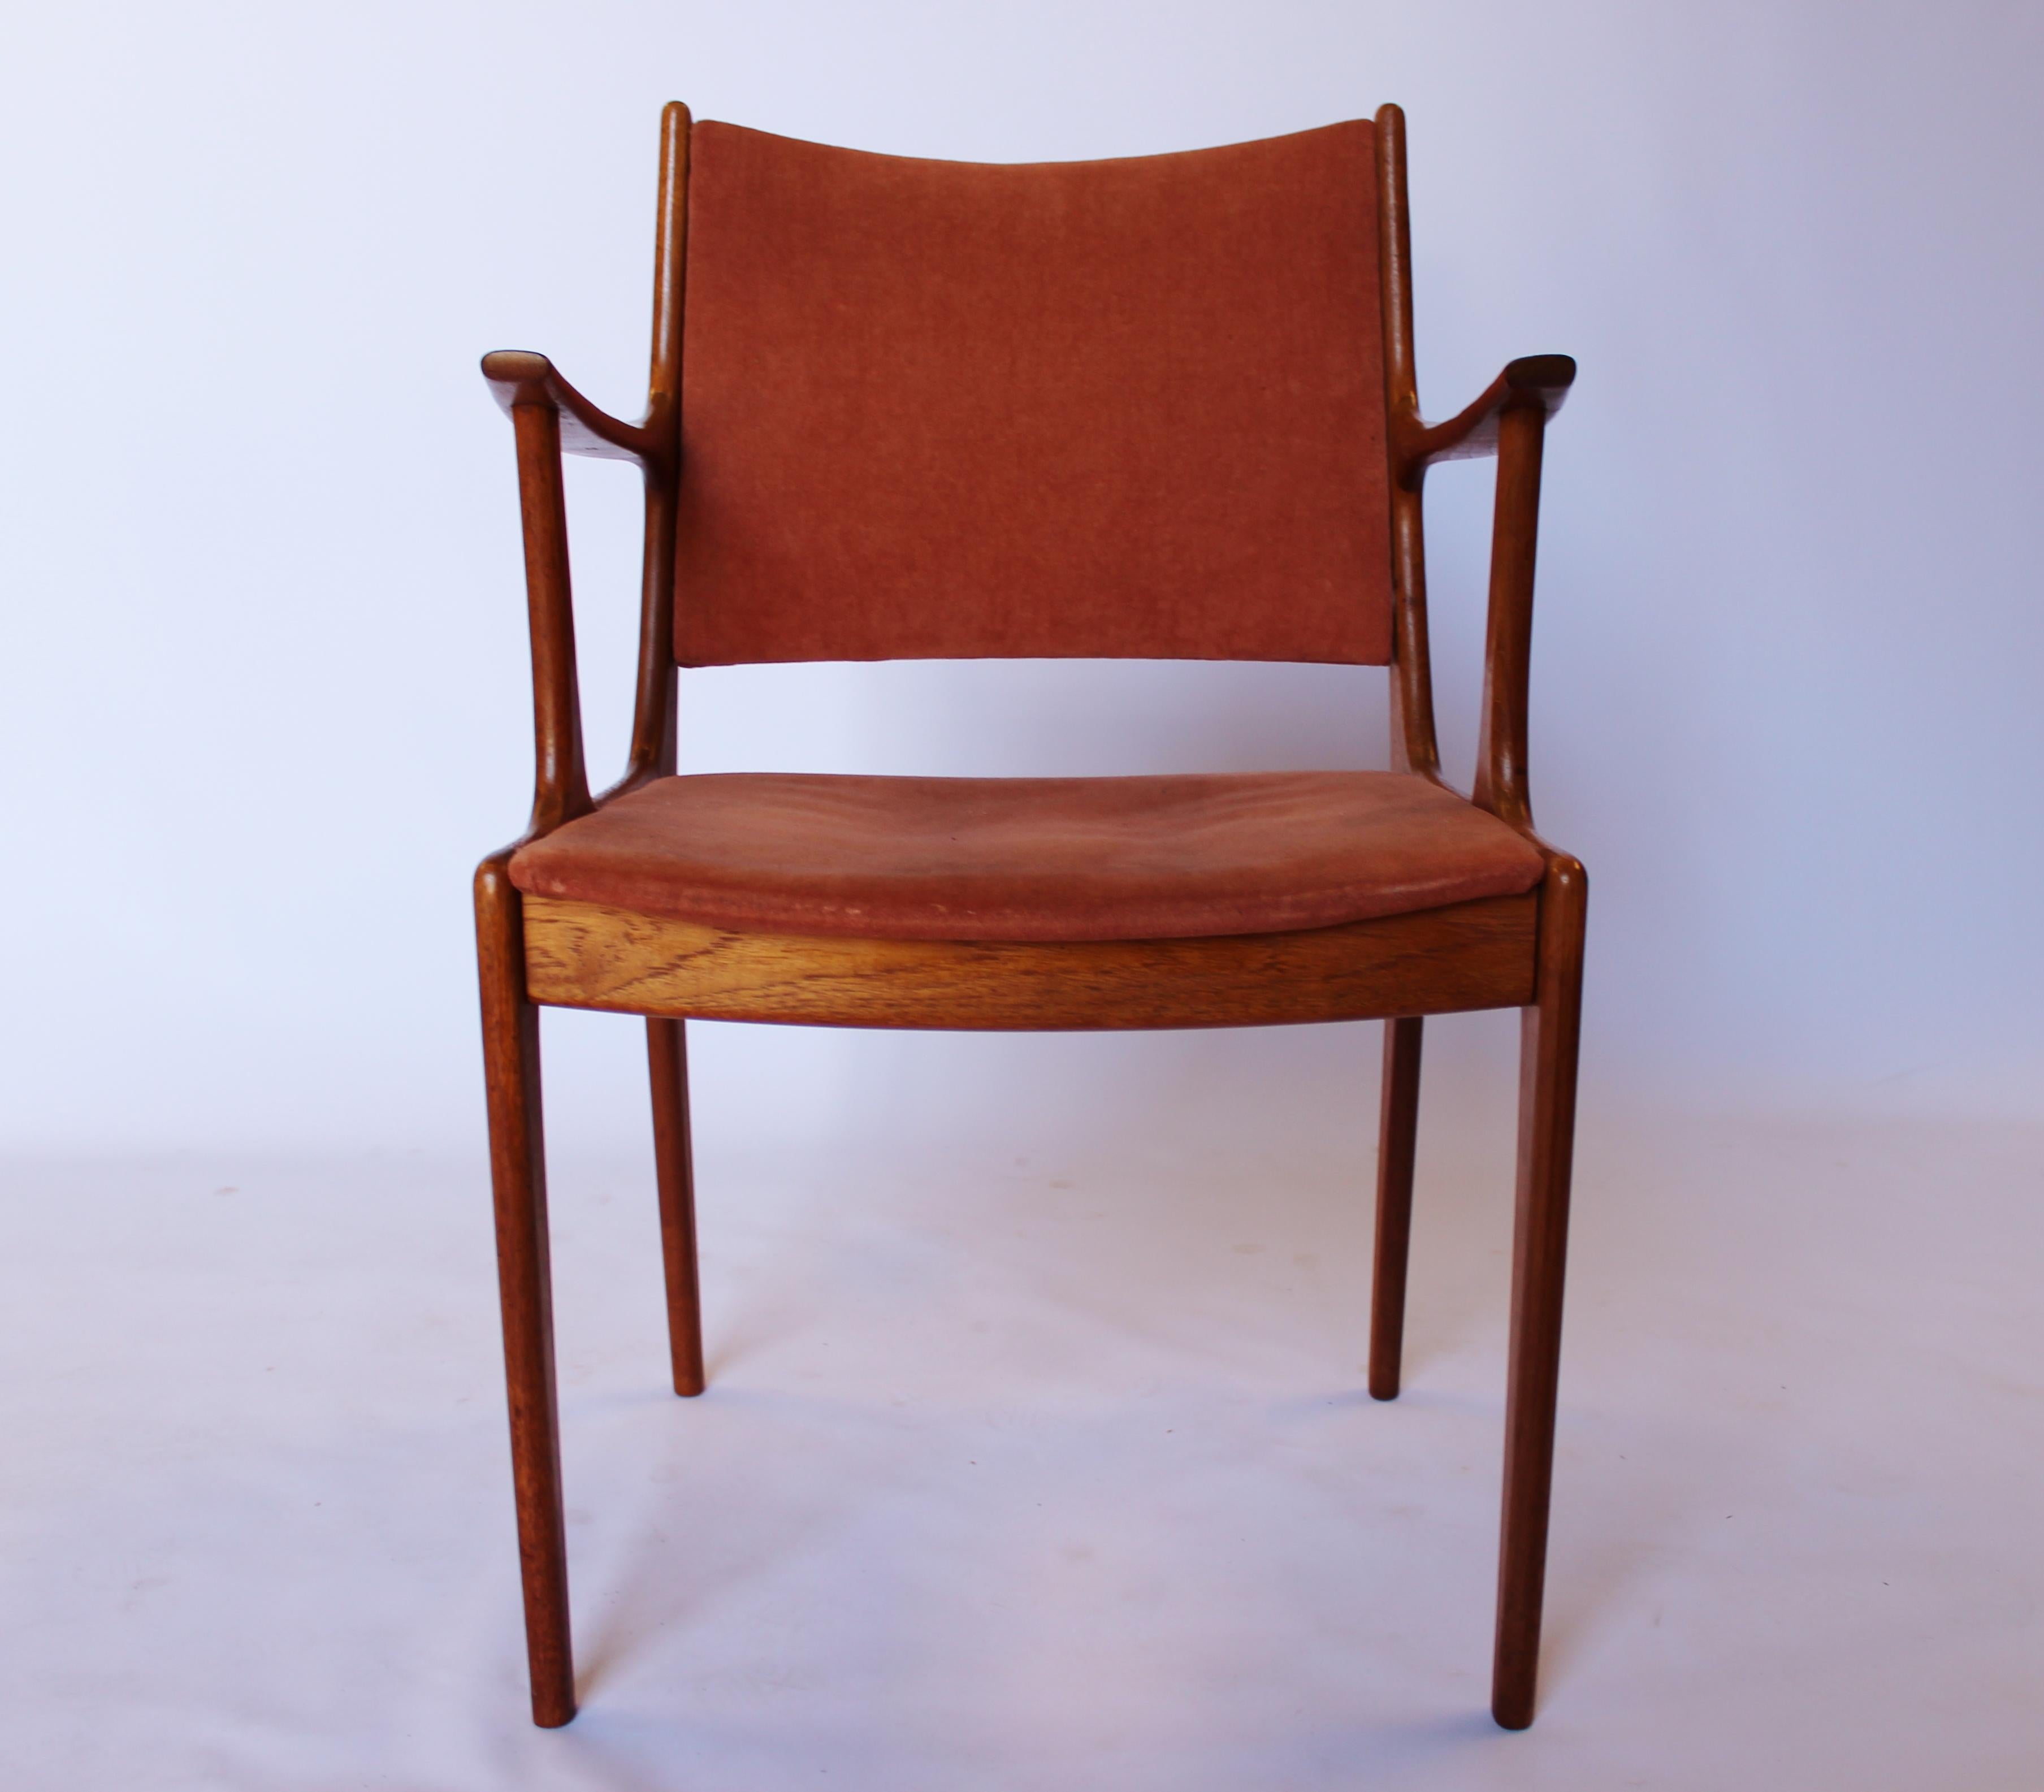 Set of two armchairs in teak and pale pink suede designed by Johannes Andersen and manufactured by Uldum Furniture Factory in the 1960s. The chairs are in great vintage condition.